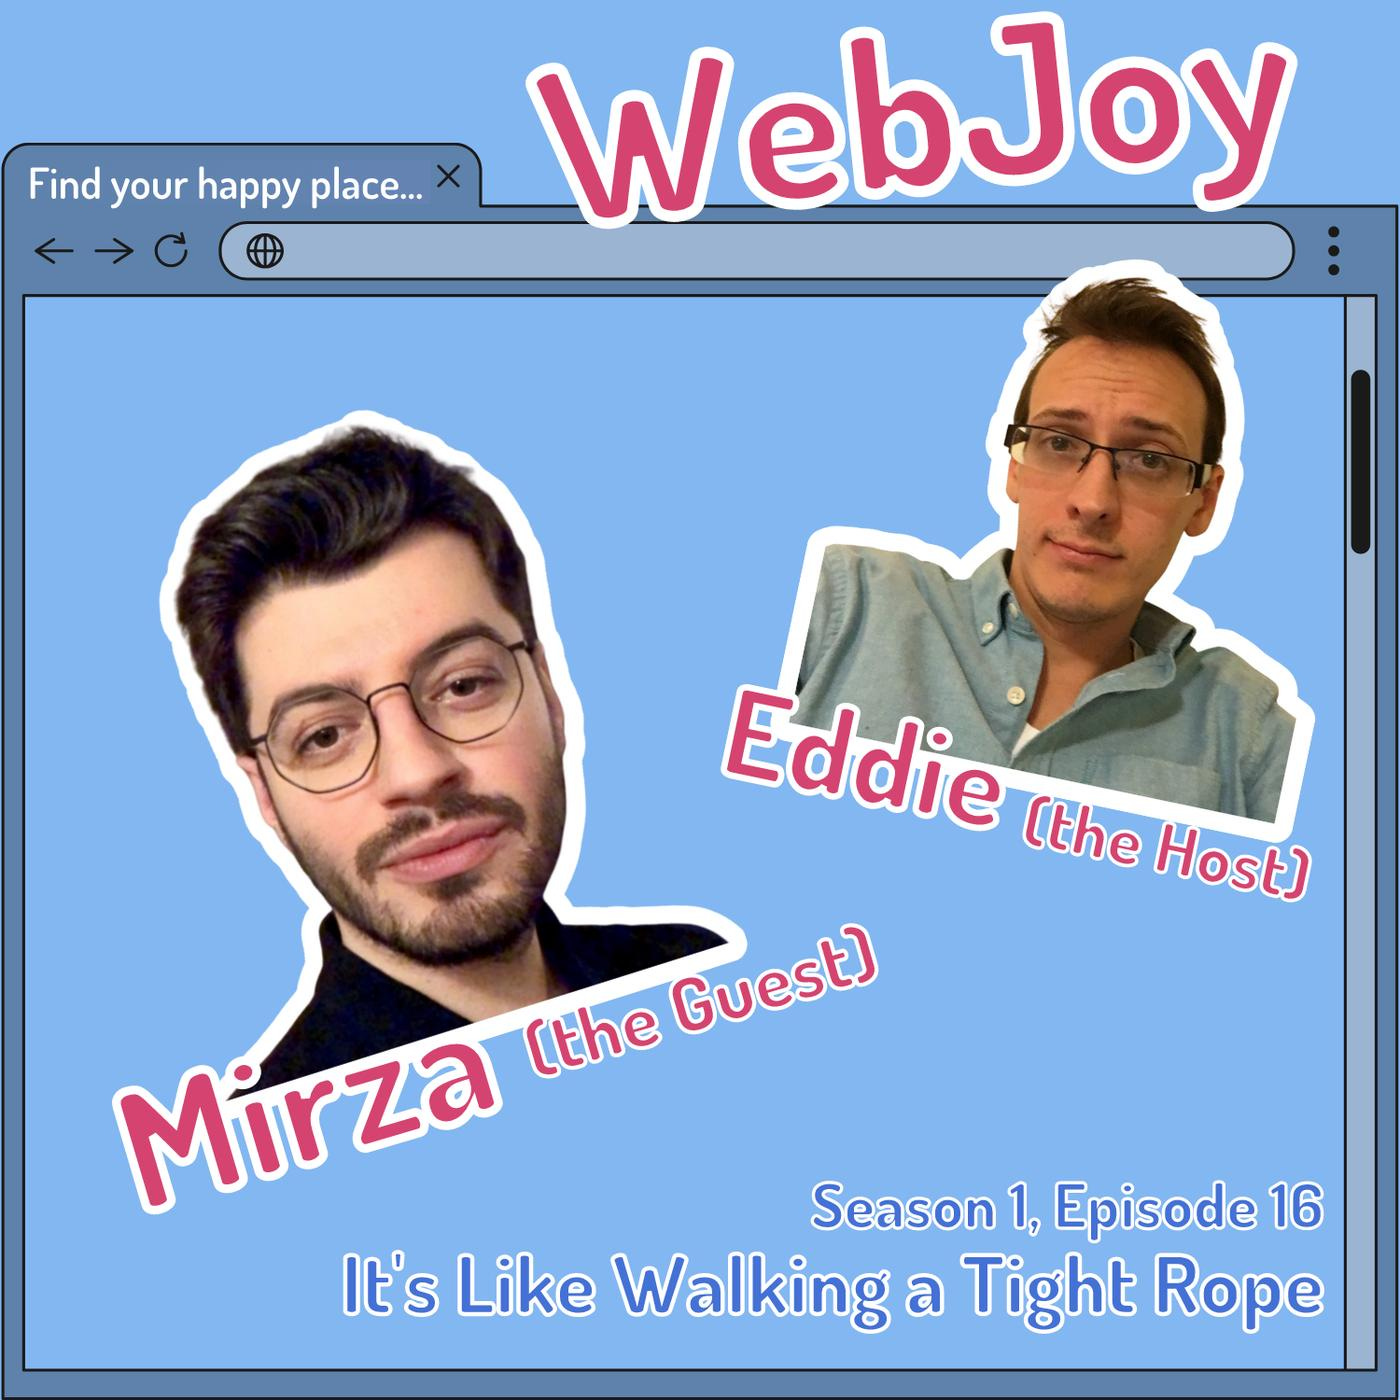 Mirza (pictured,the guest), Eddie (pictured,the host), Season 1, Episode 16, "It's like Walking a Tight Rope"